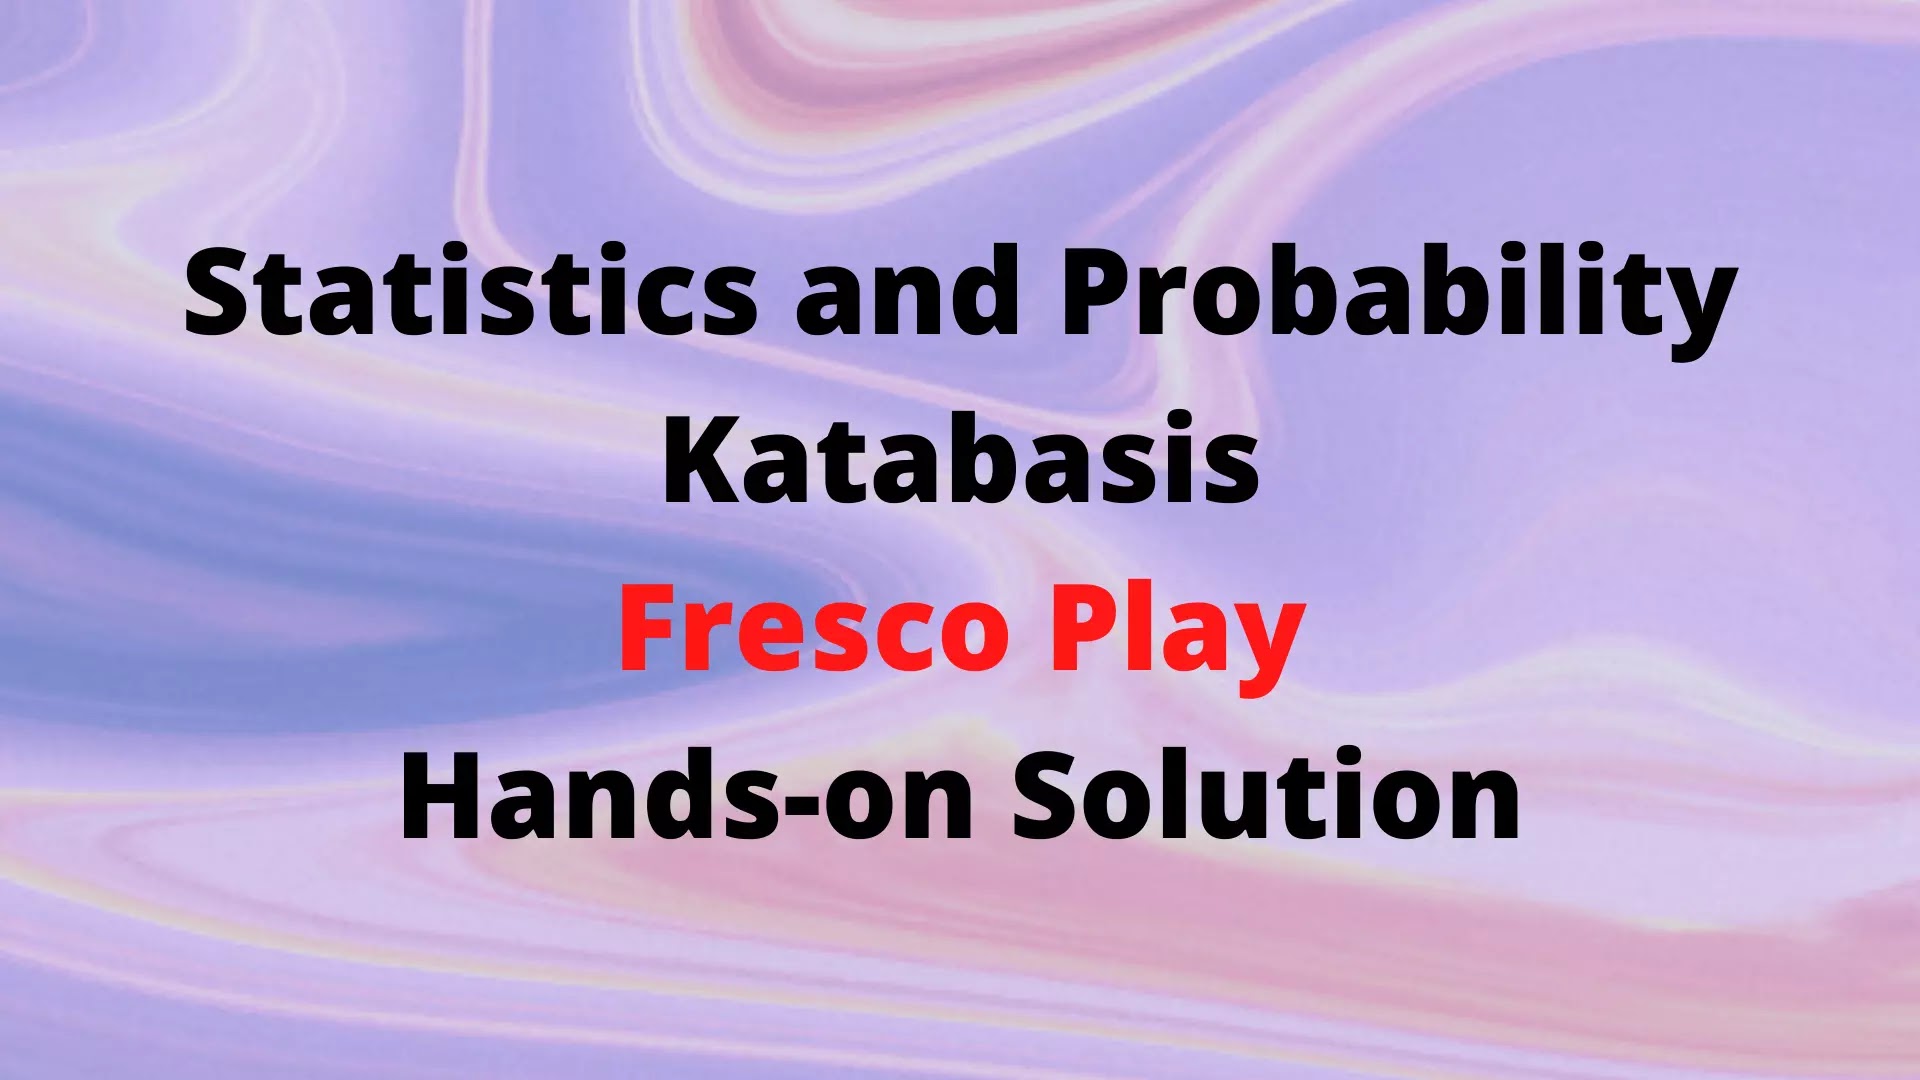 Statistics and Probability Katabasis Hands-on solution  |  TCS Fresco Play